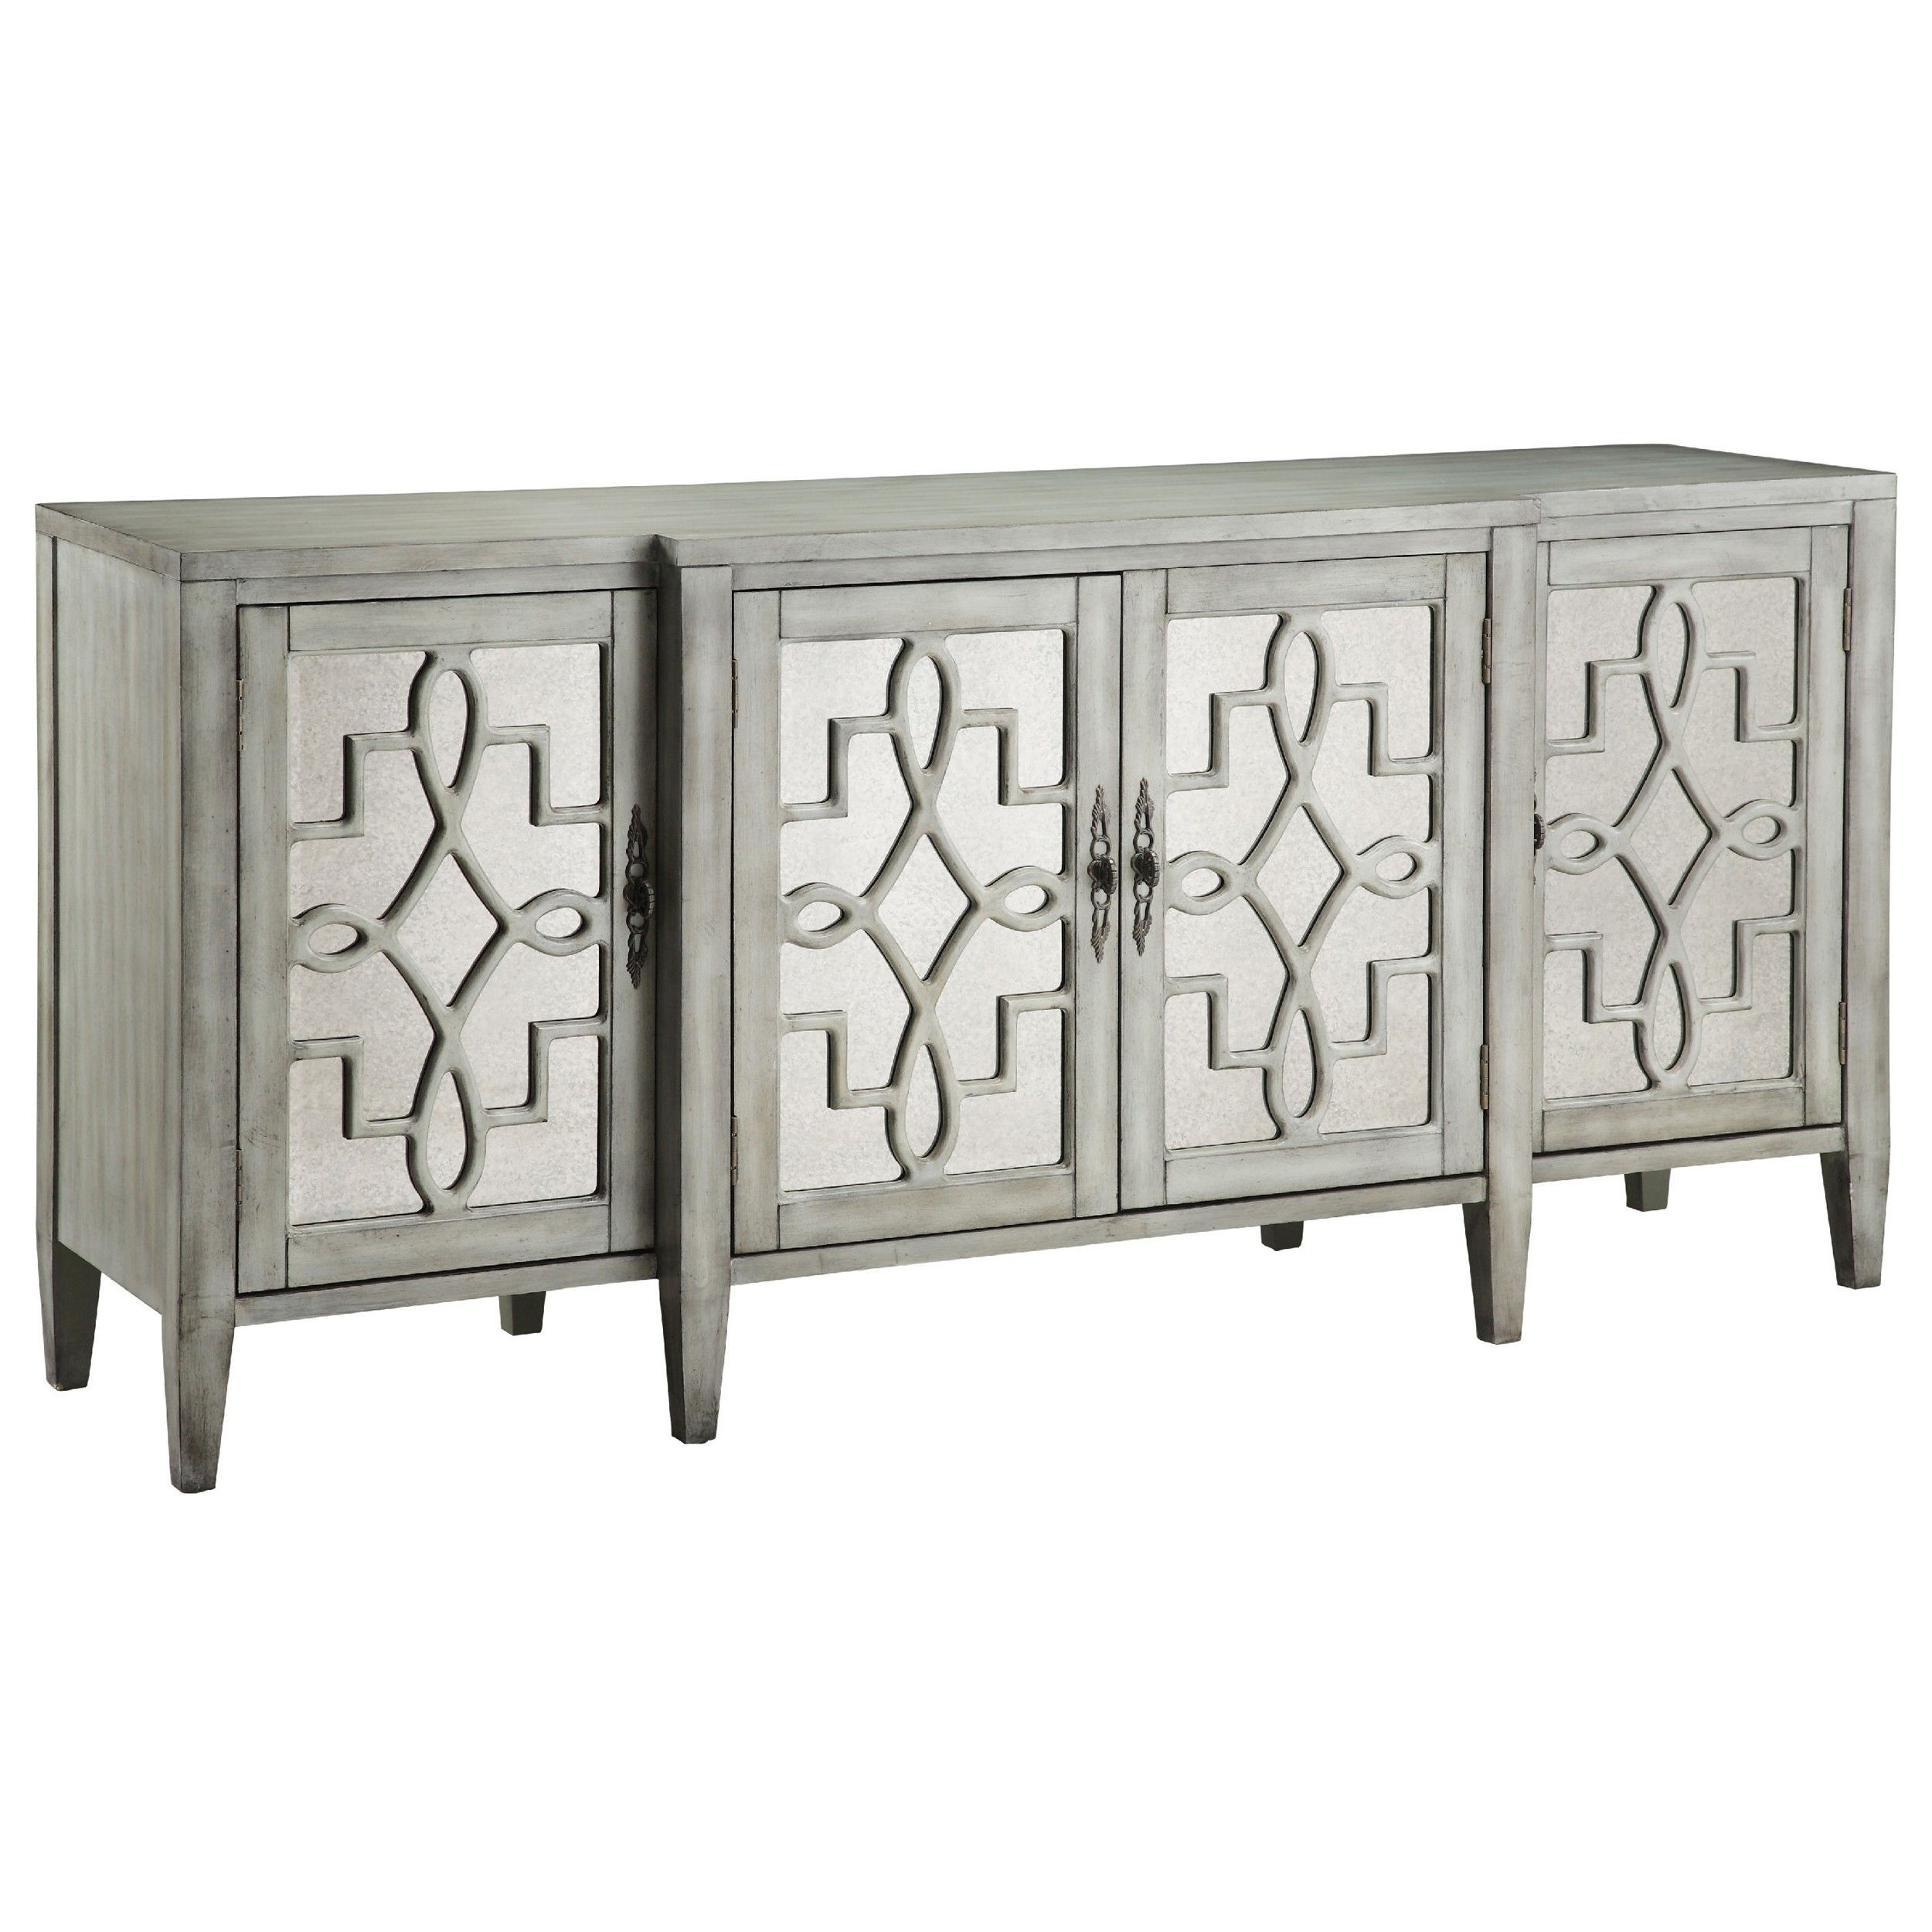 Isabelle Credenza | Furnishings | Pinterest | Credenza, Sideboard In Most Recent 2 Door Mirror Front Sideboards (View 3 of 20)